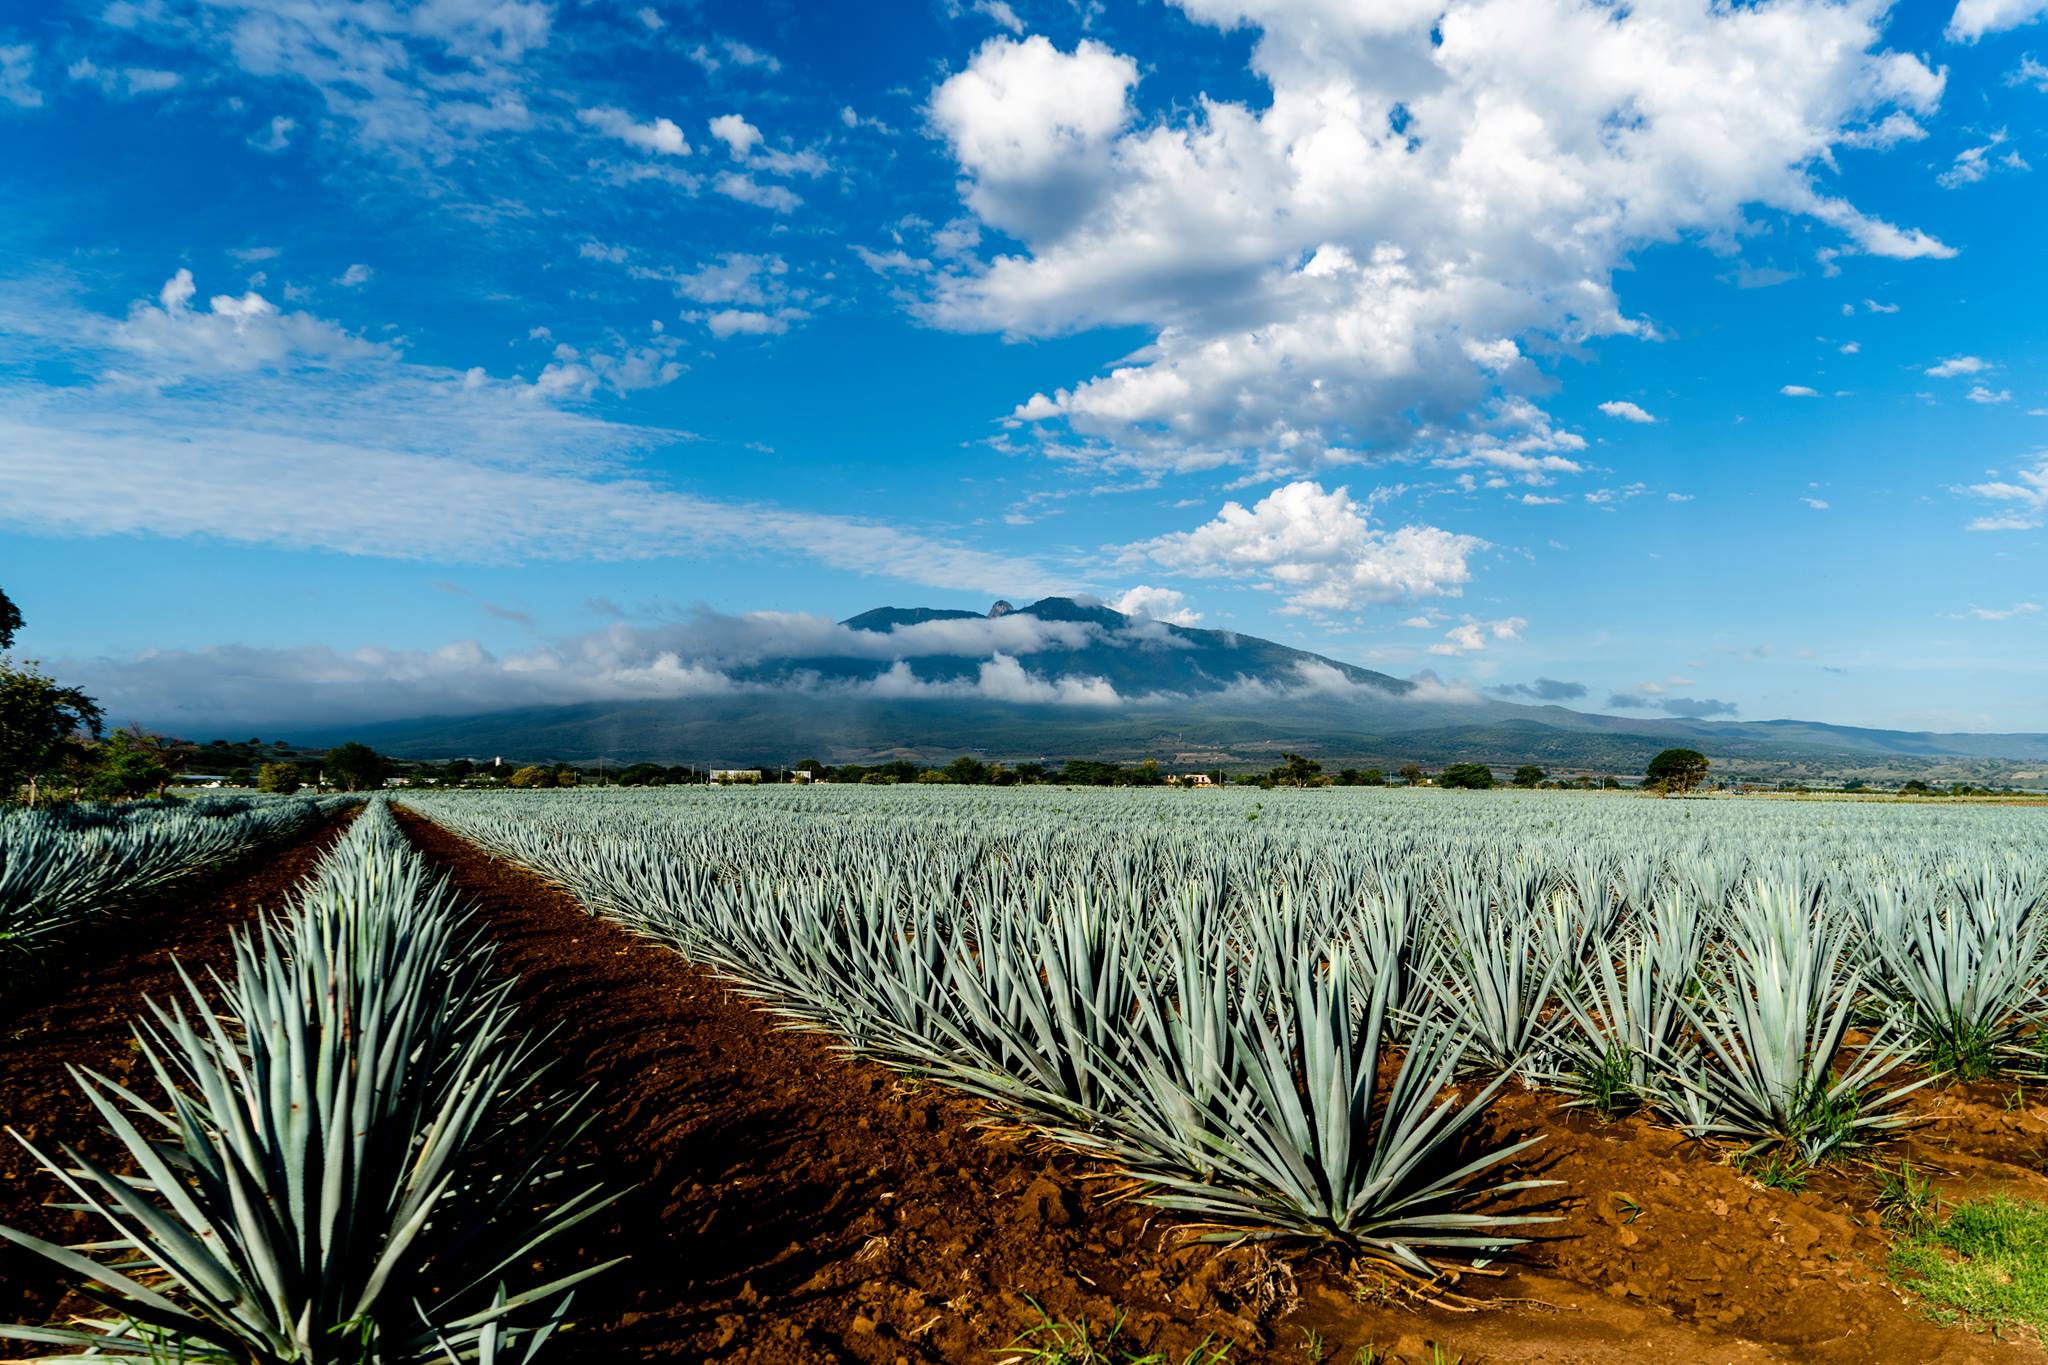 Photo of thriving agave plants at La Cofradia in Tequila Valley, Mexico courtesy of Hiatus Tequila